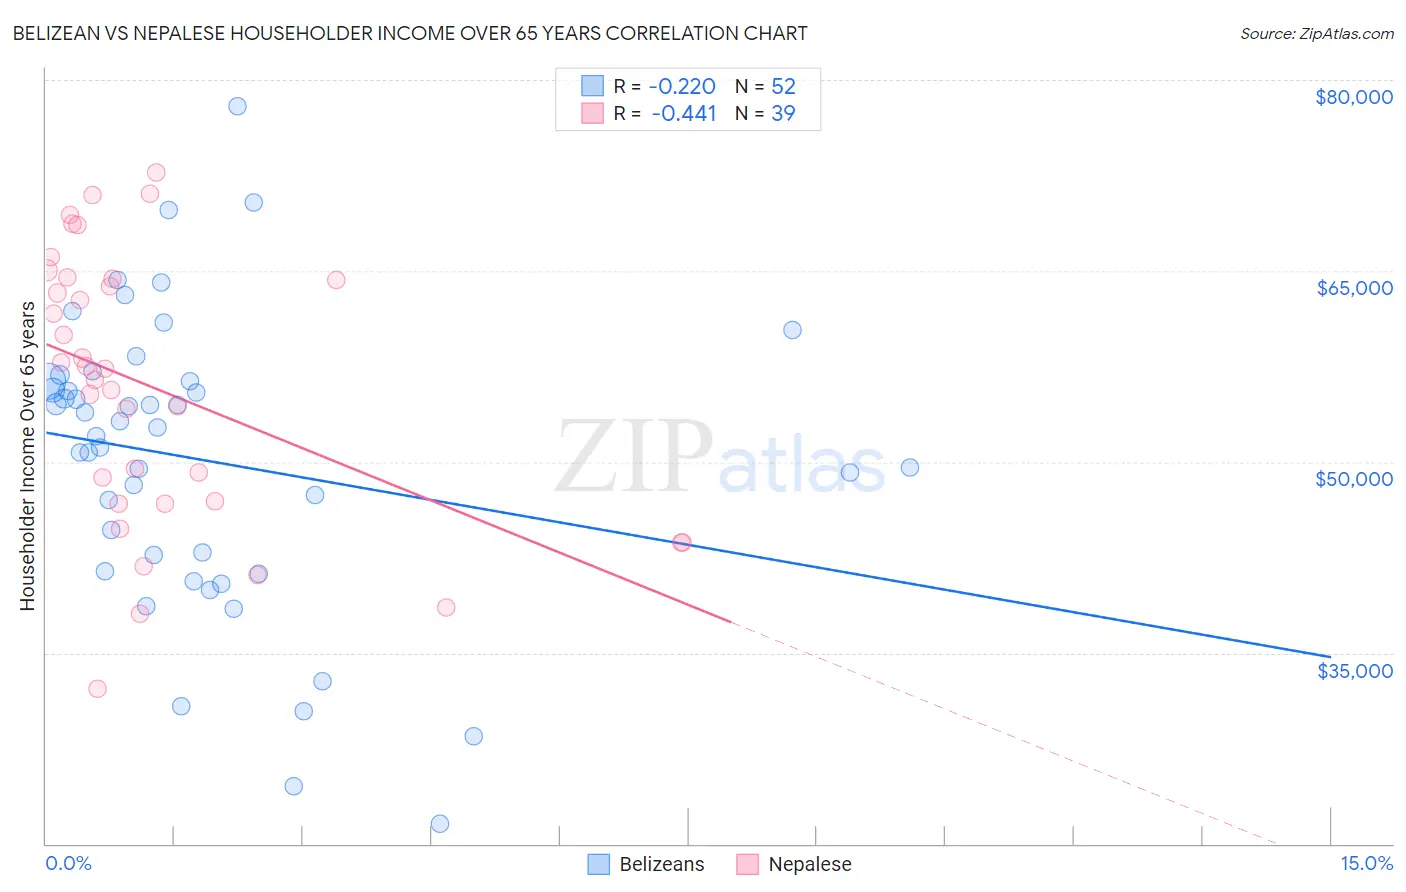 Belizean vs Nepalese Householder Income Over 65 years